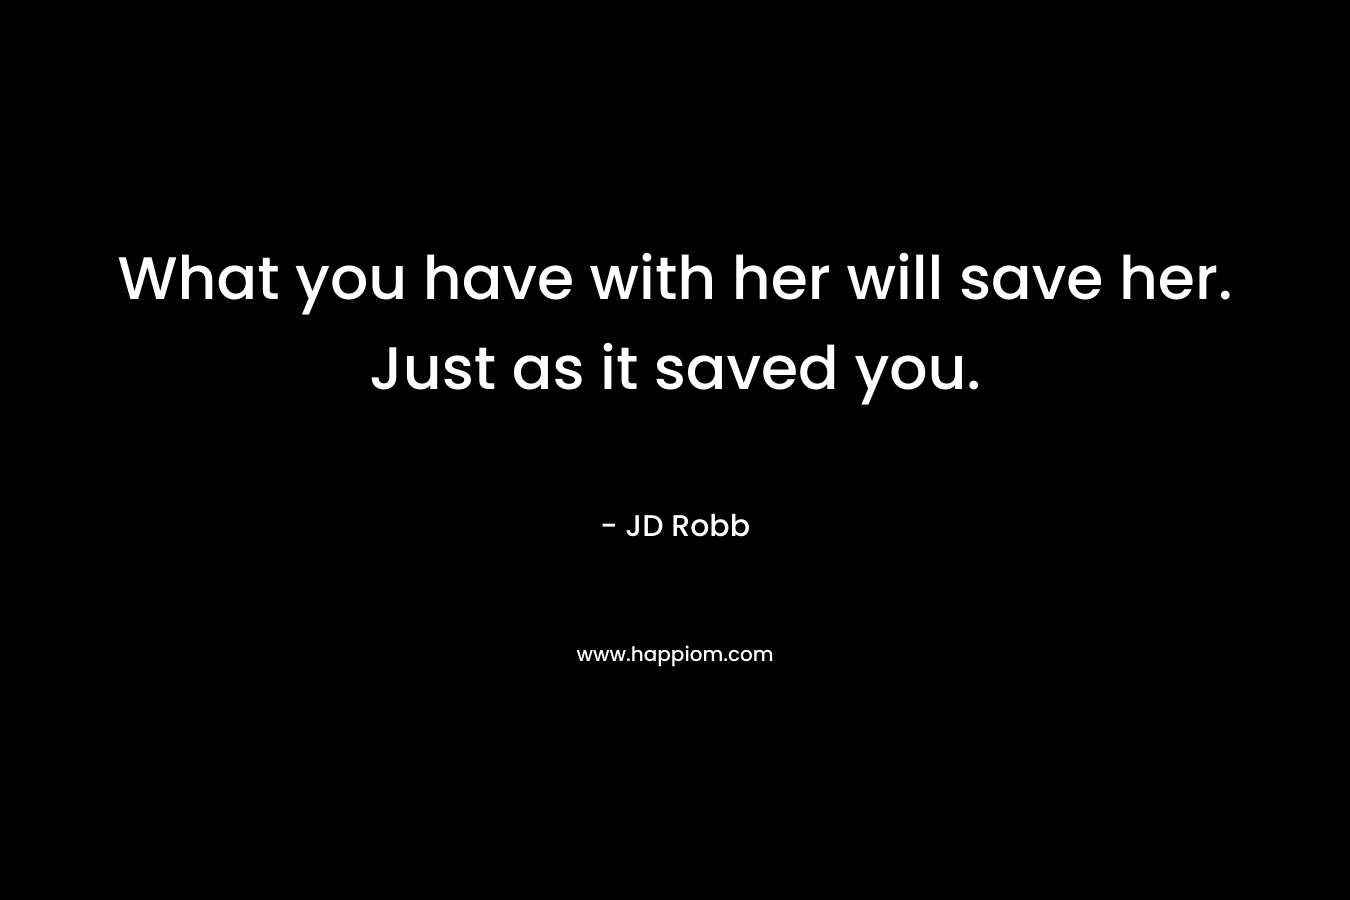 What you have with her will save her. Just as it saved you.